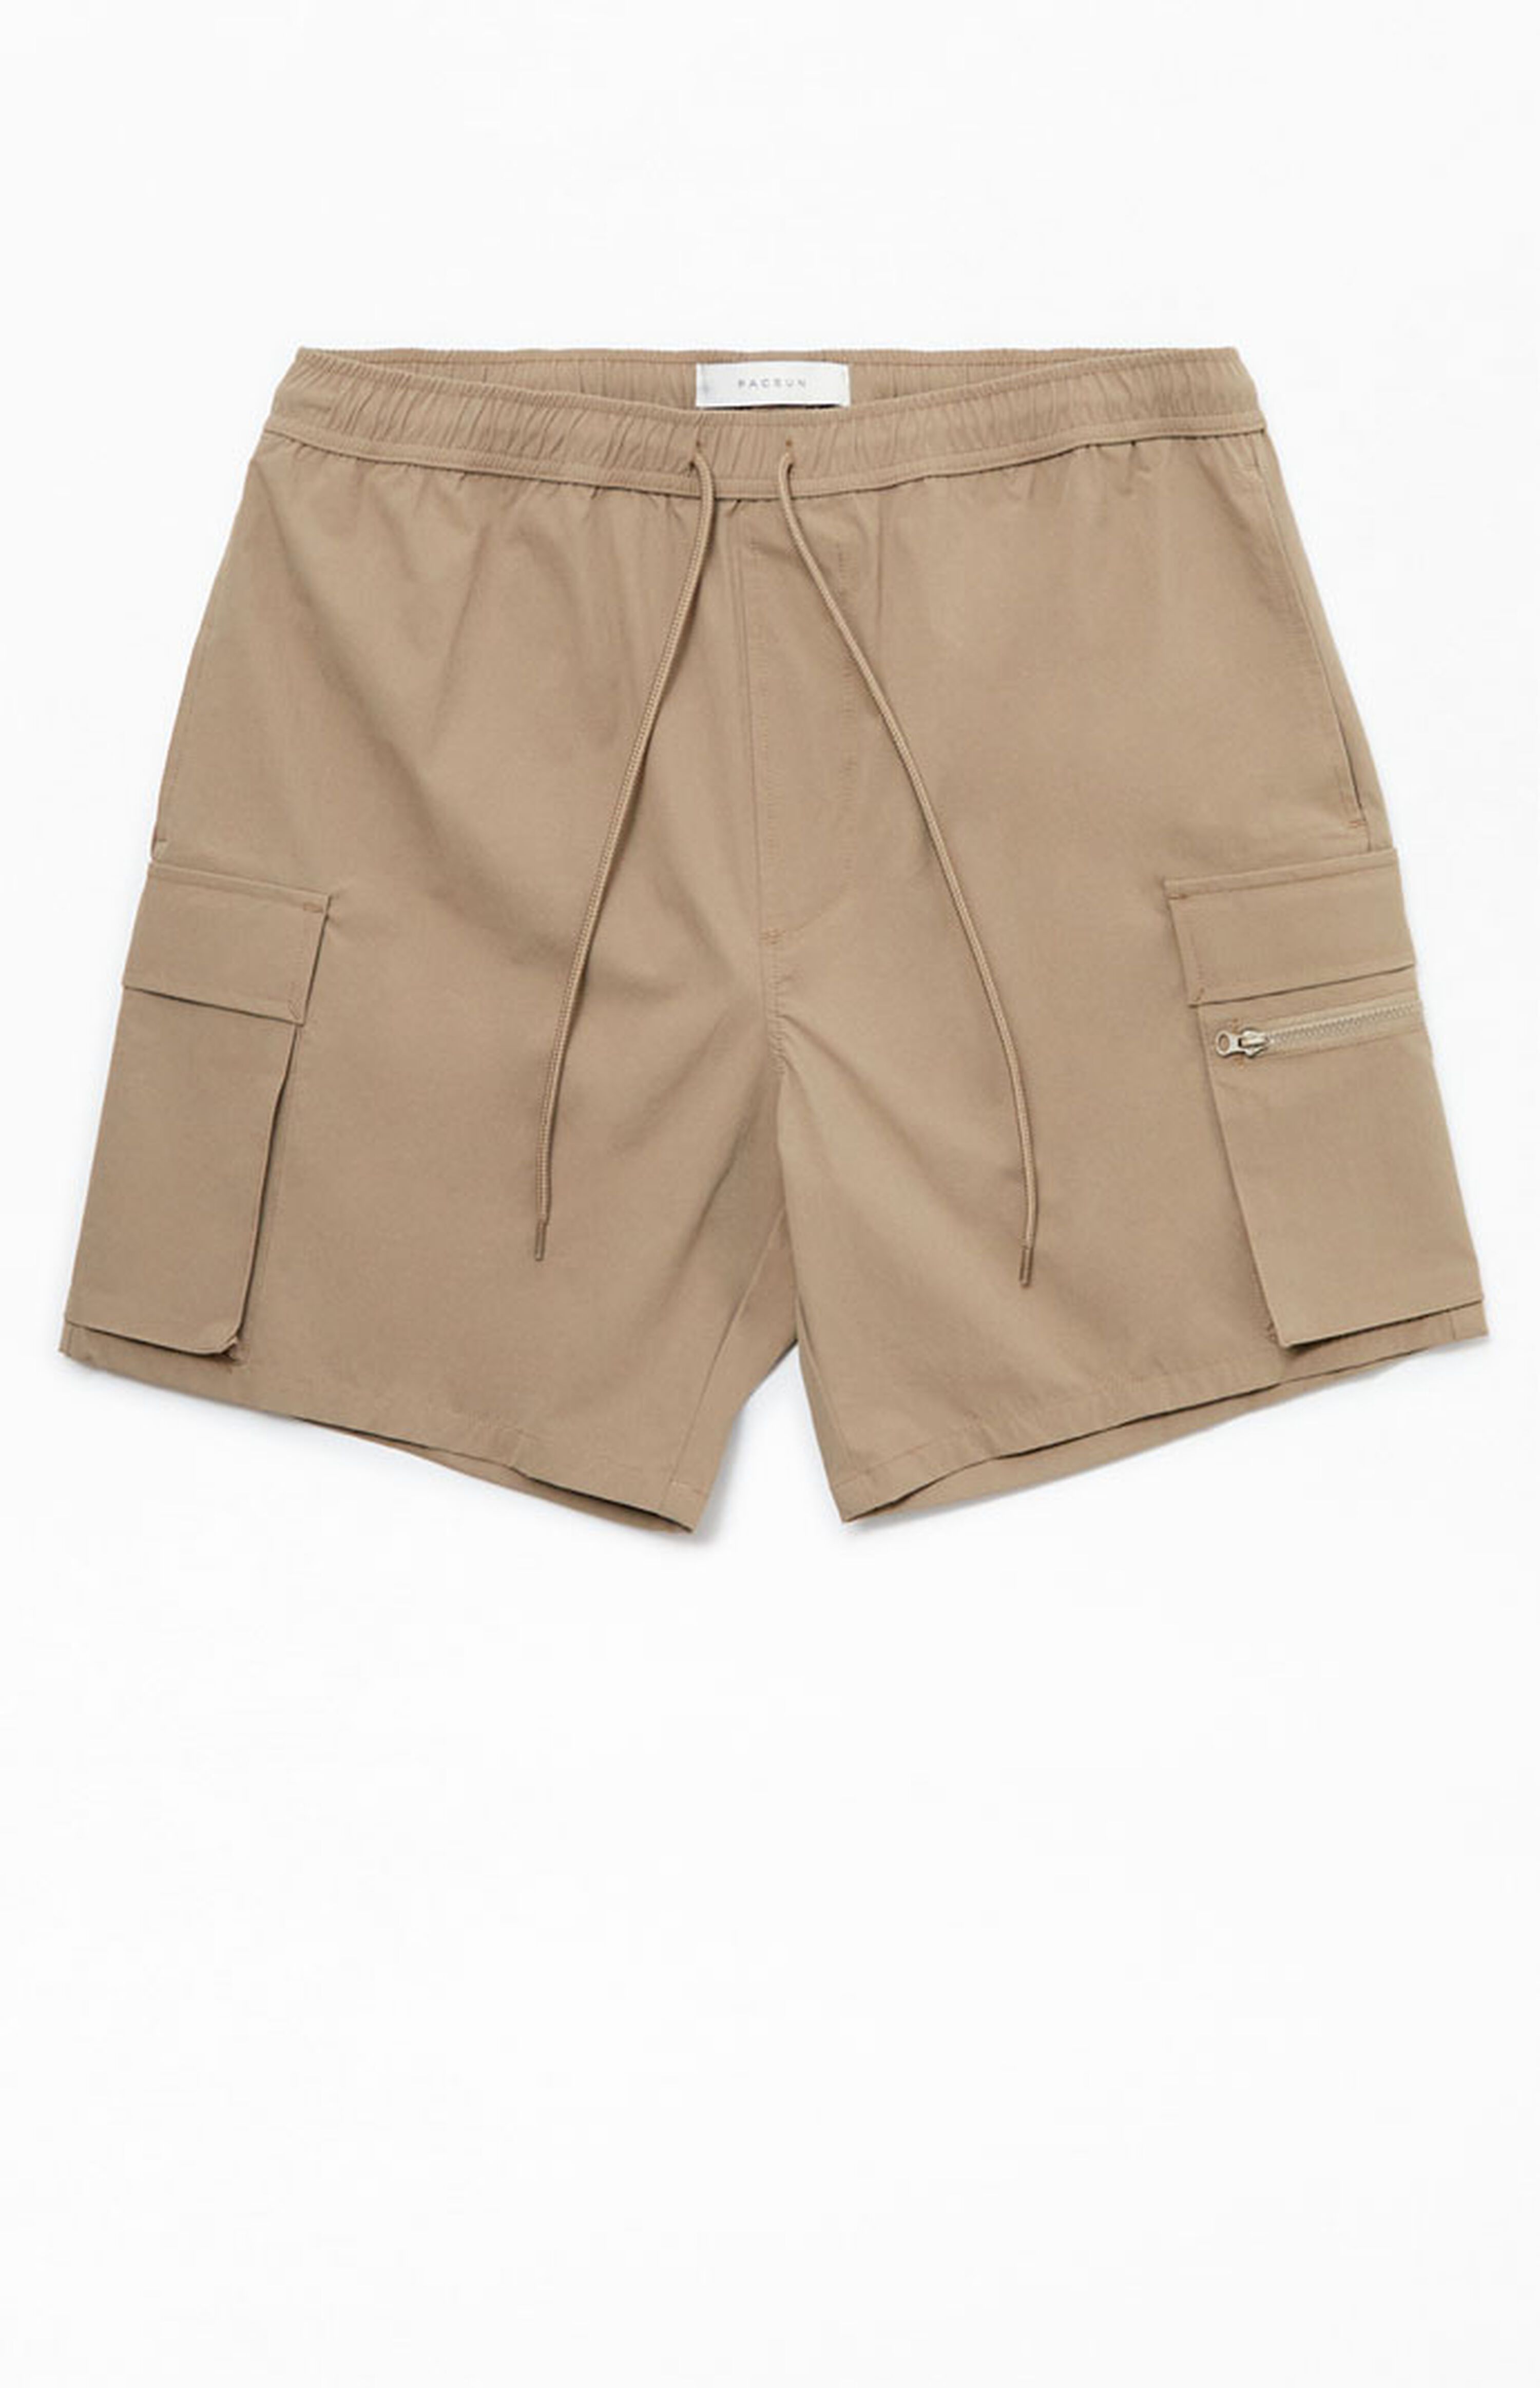 PacSun Brown Stretch Cargo Shorts | PacSun